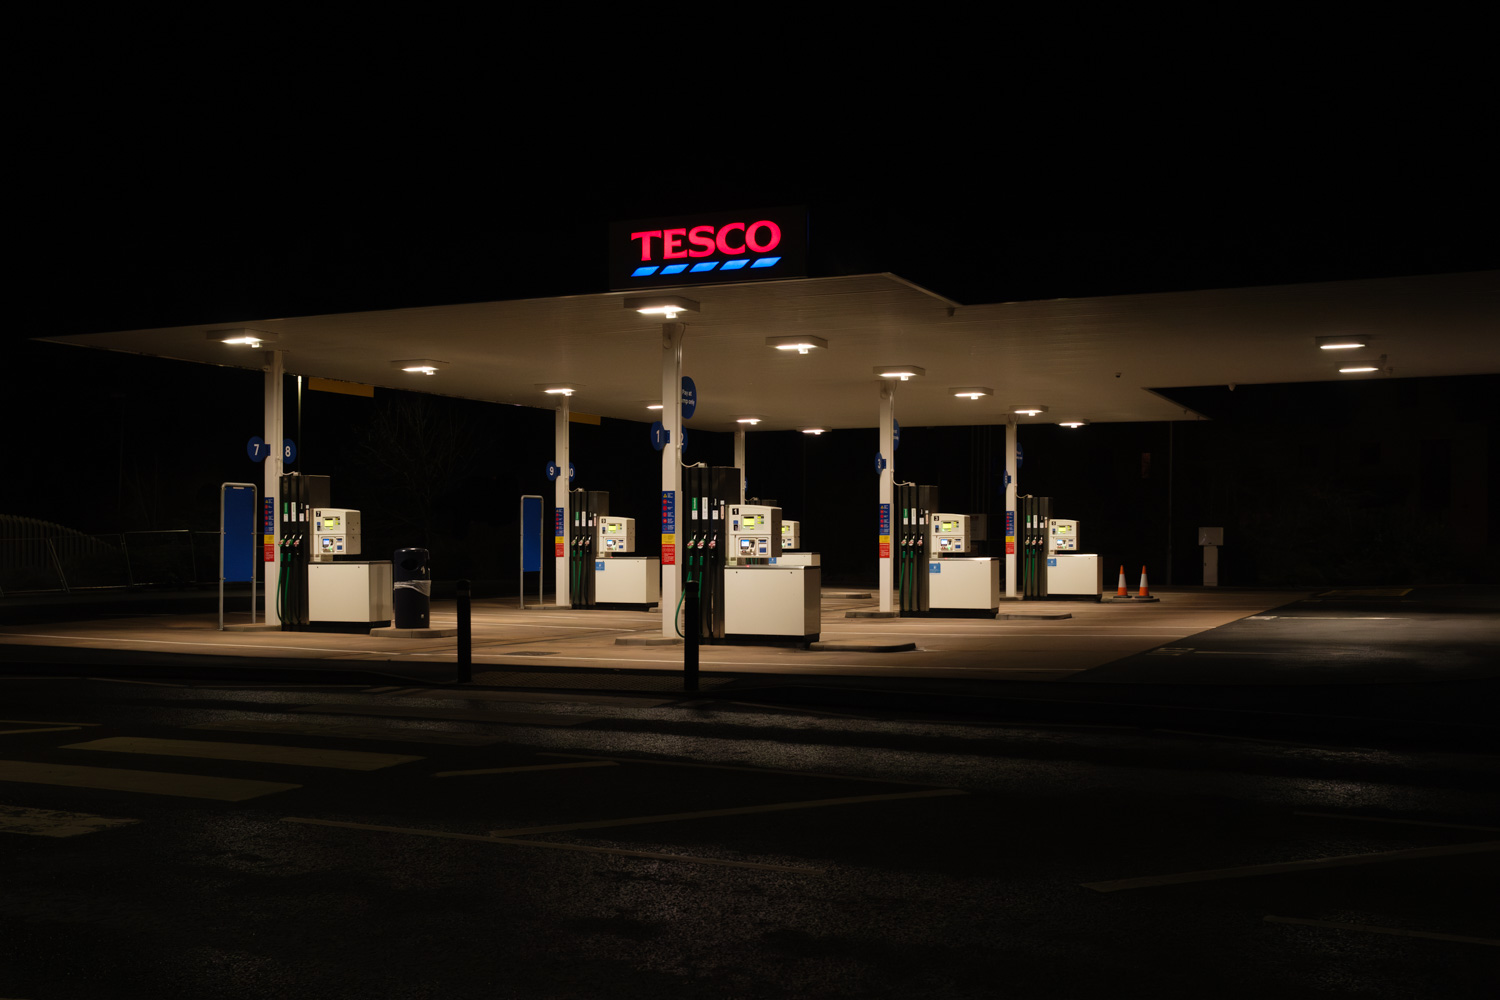 Desserted fuel station after dark at Tesco, Seaton 27_12_23 2